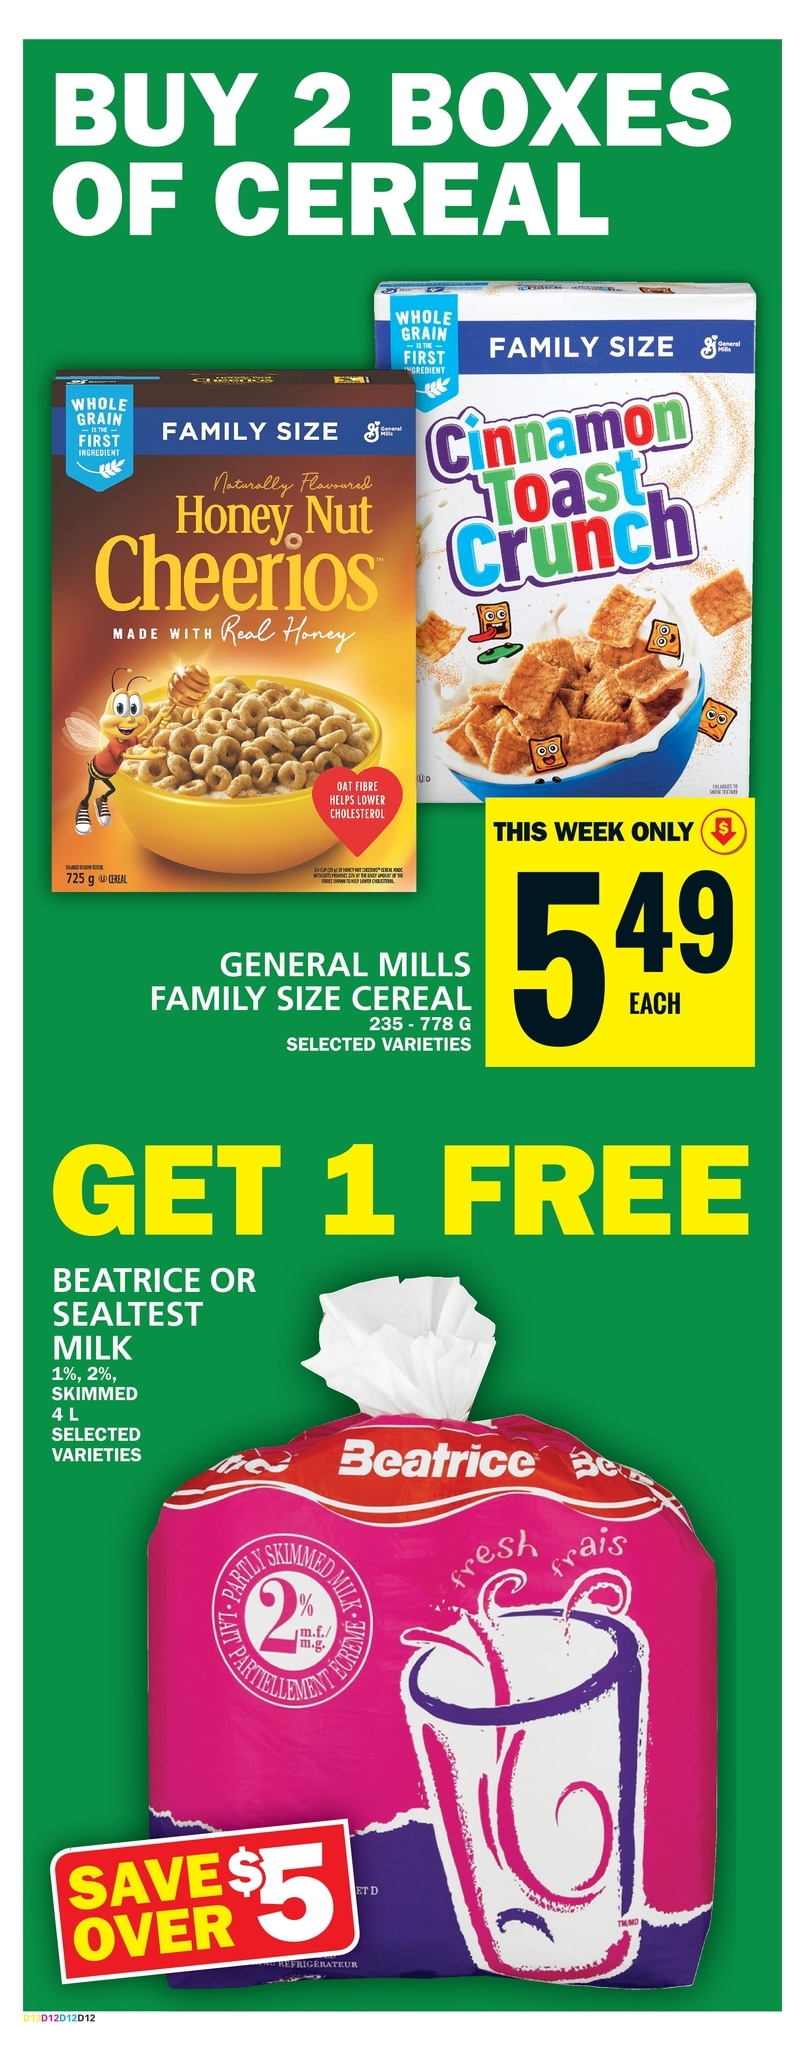 Food Basics - Weekly Flyer Specials - Page 7